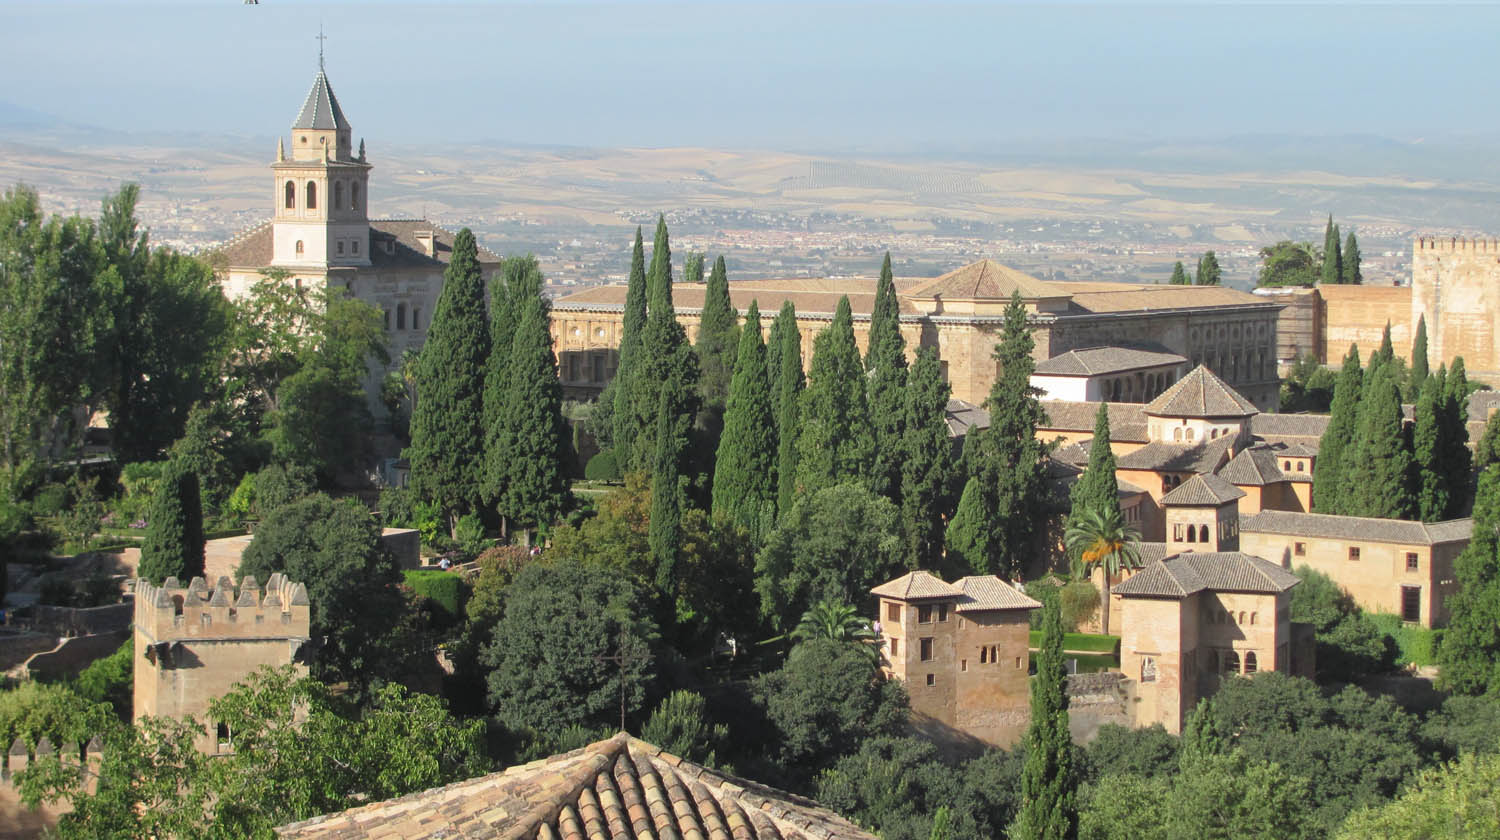 The palaces of the Alhambra (Copy)